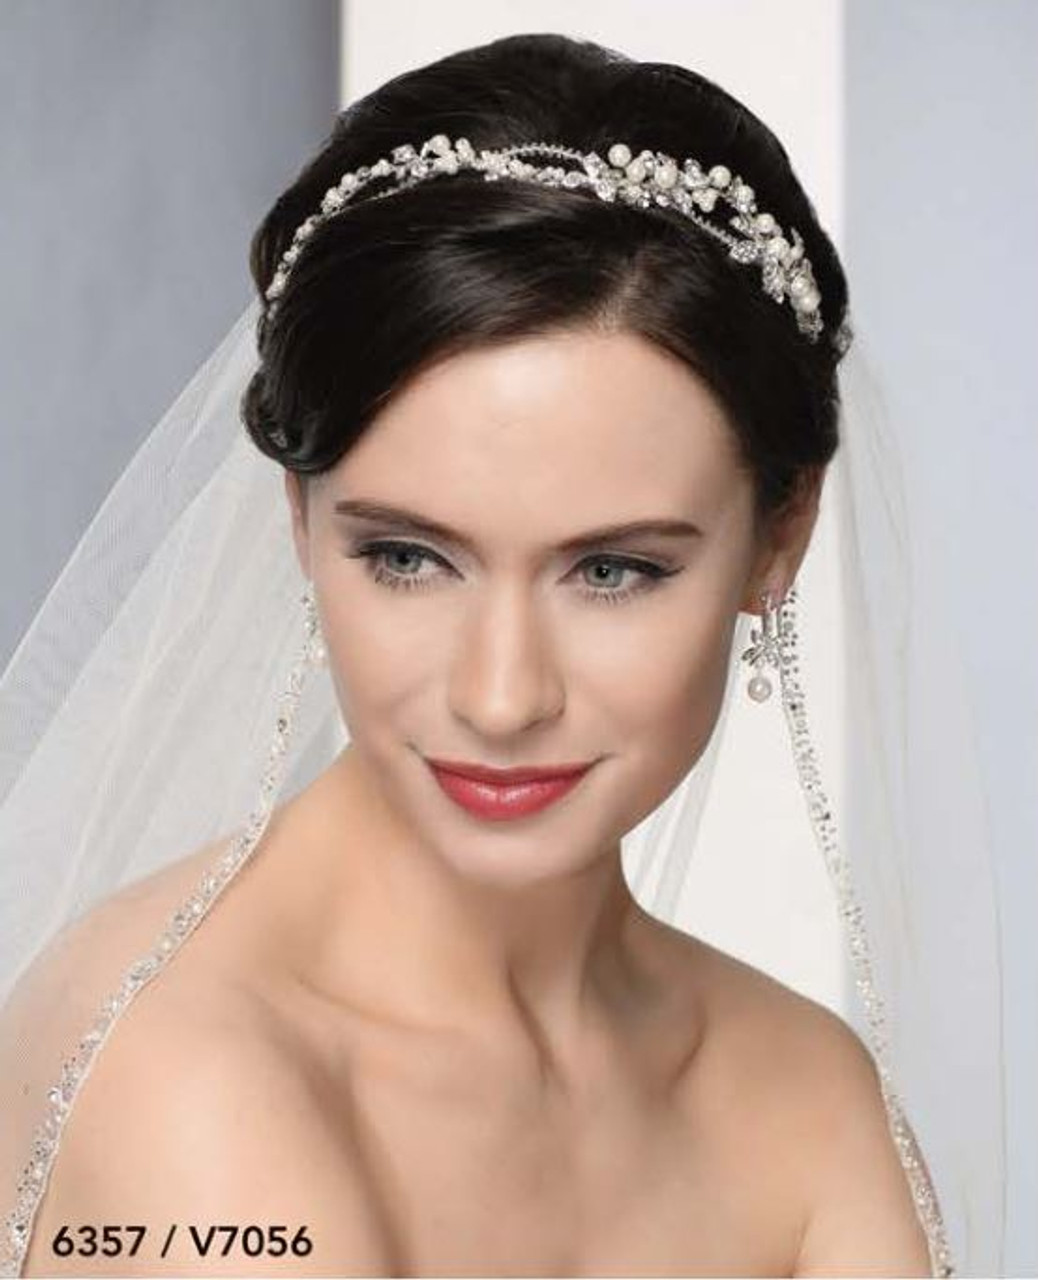 Bel Aire Bridal Veils V7056C - Cathedral - Silver beading, rhinestones, and crystals -108 Inches